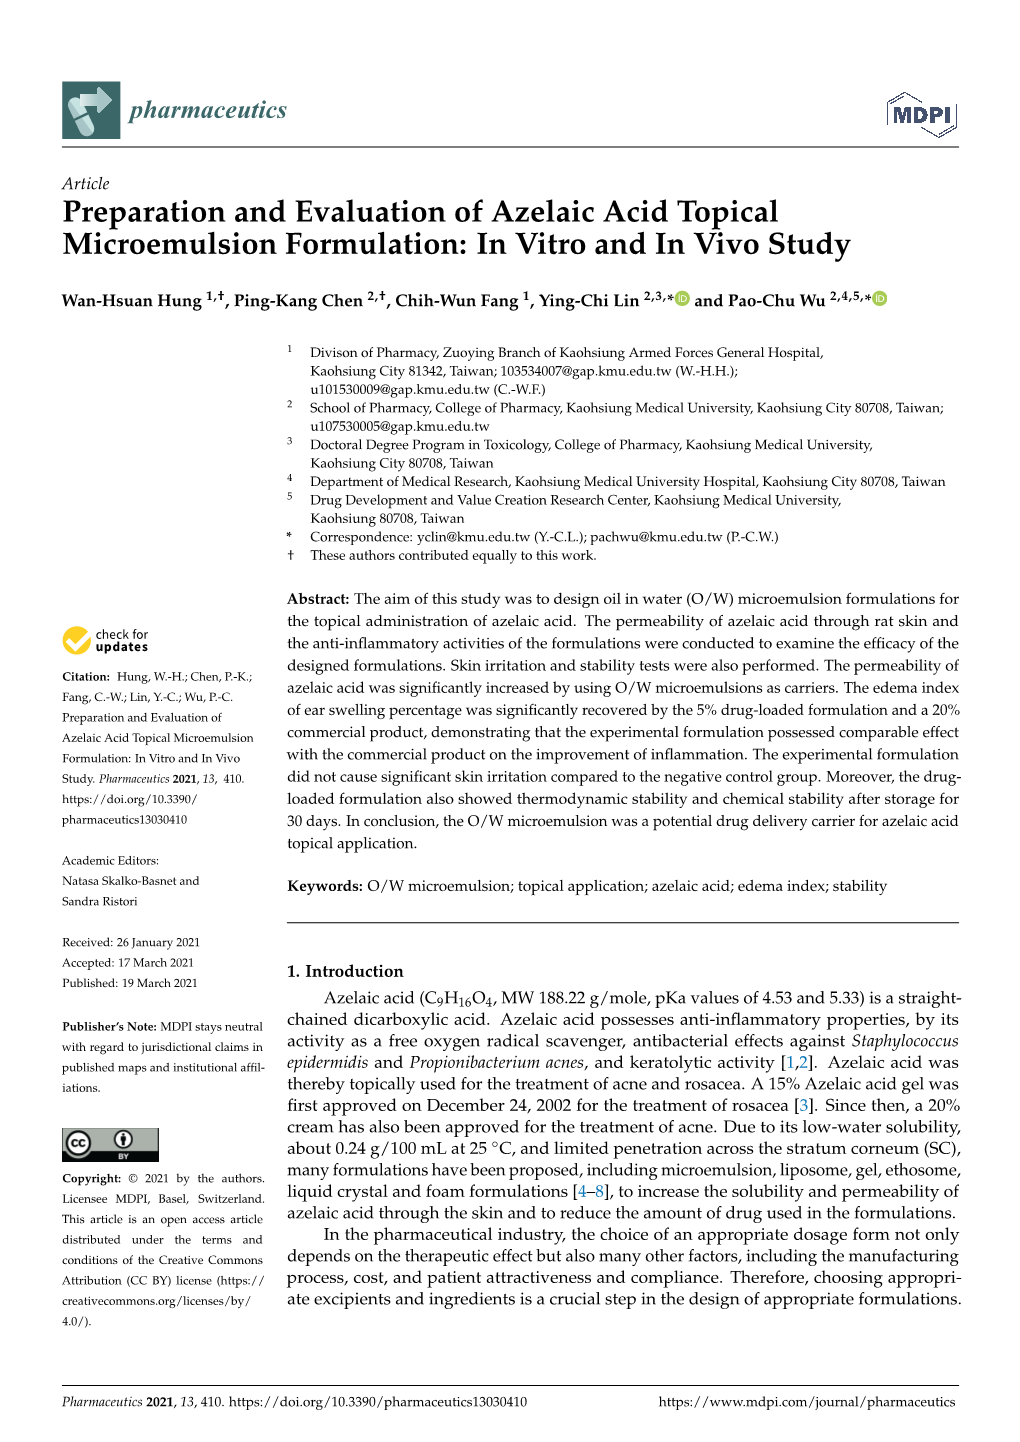 Preparation and Evaluation of Azelaic Acid Topical Microemulsion Formulation: in Vitro and in Vivo Study